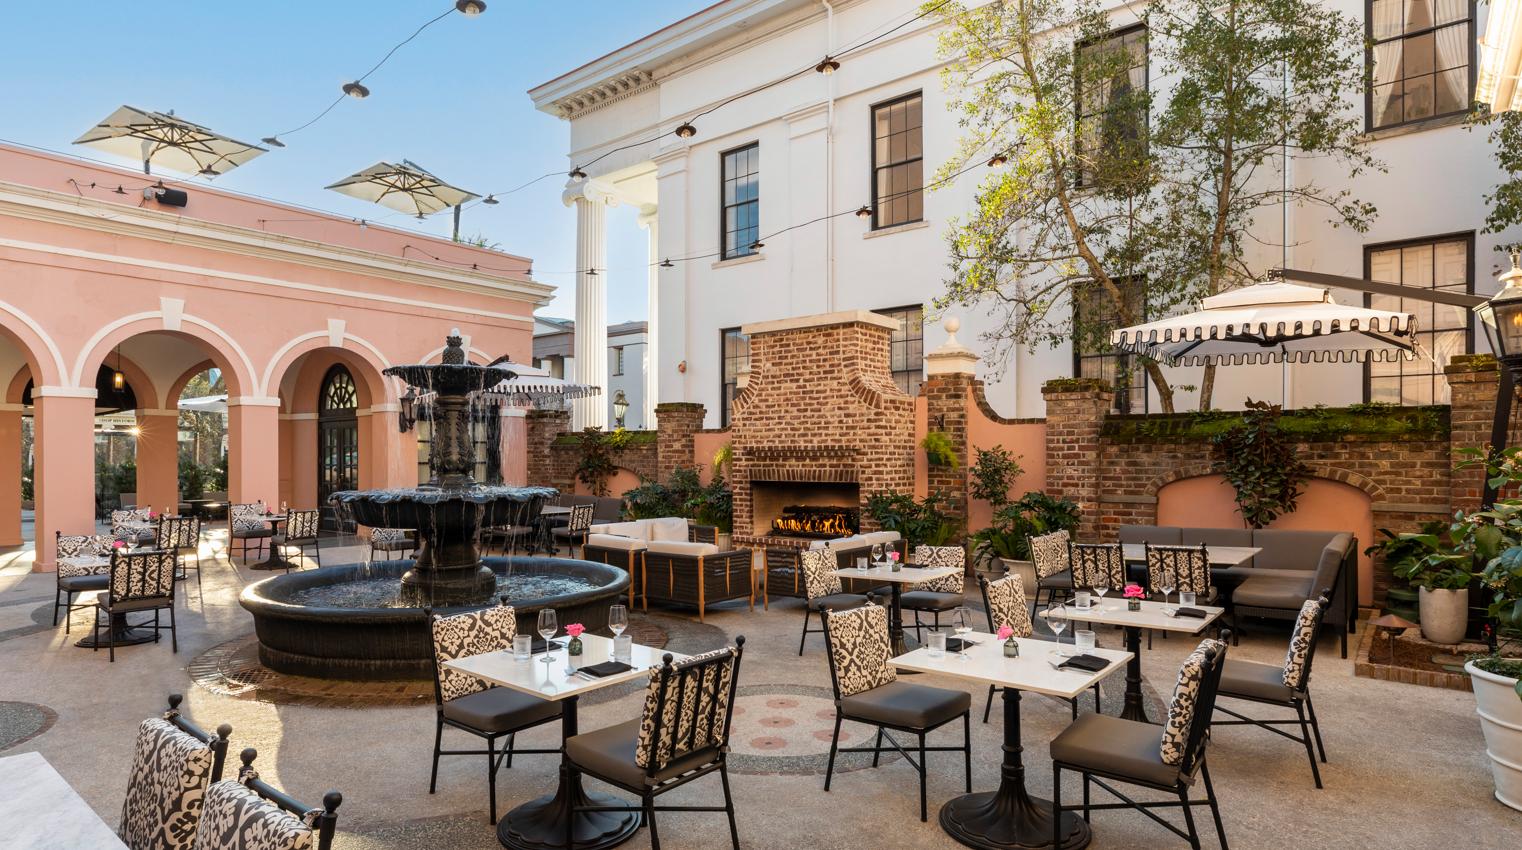 Charleston: the hottest hotels, bars, restaurants, shops and